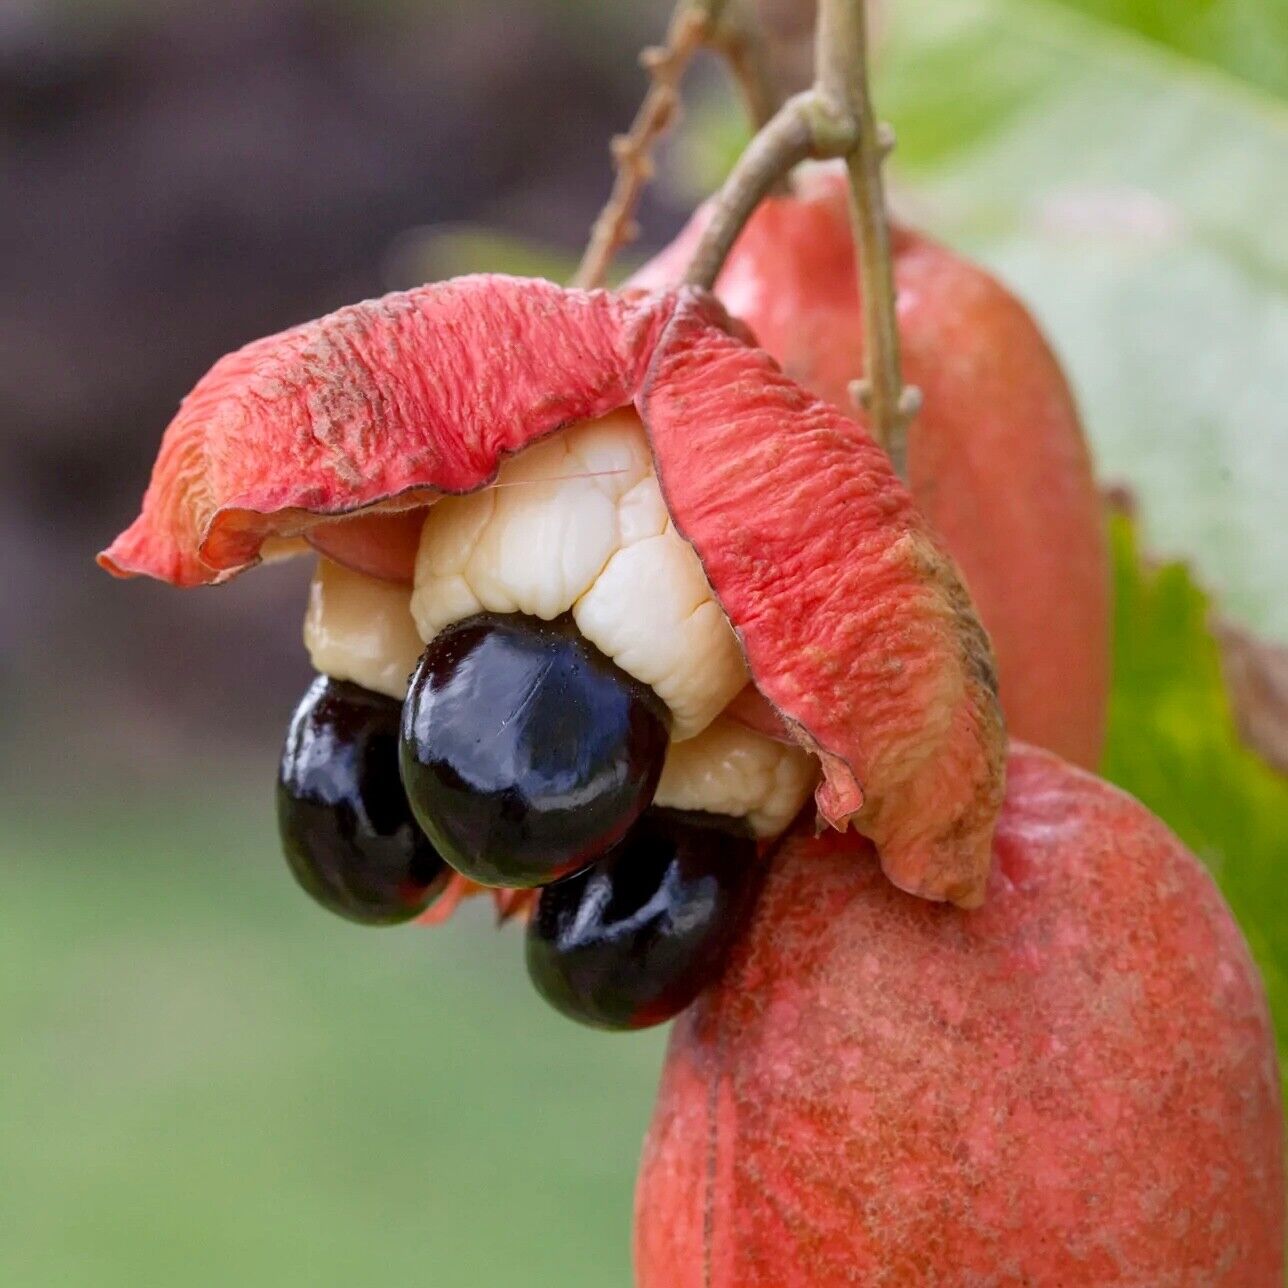 Ackee Tree, Blighia sapida, Tropical Fruit Tree, Ackee Fruit, Fruit Cultivation, Fresh Ackee, Edible Landscaping, Buy Ackee Tree, Ackee Varieties, Hardy Fruit Tree, Home Gardening, Landscape Trees, Ackee for Sale, Ackee Poisonous.